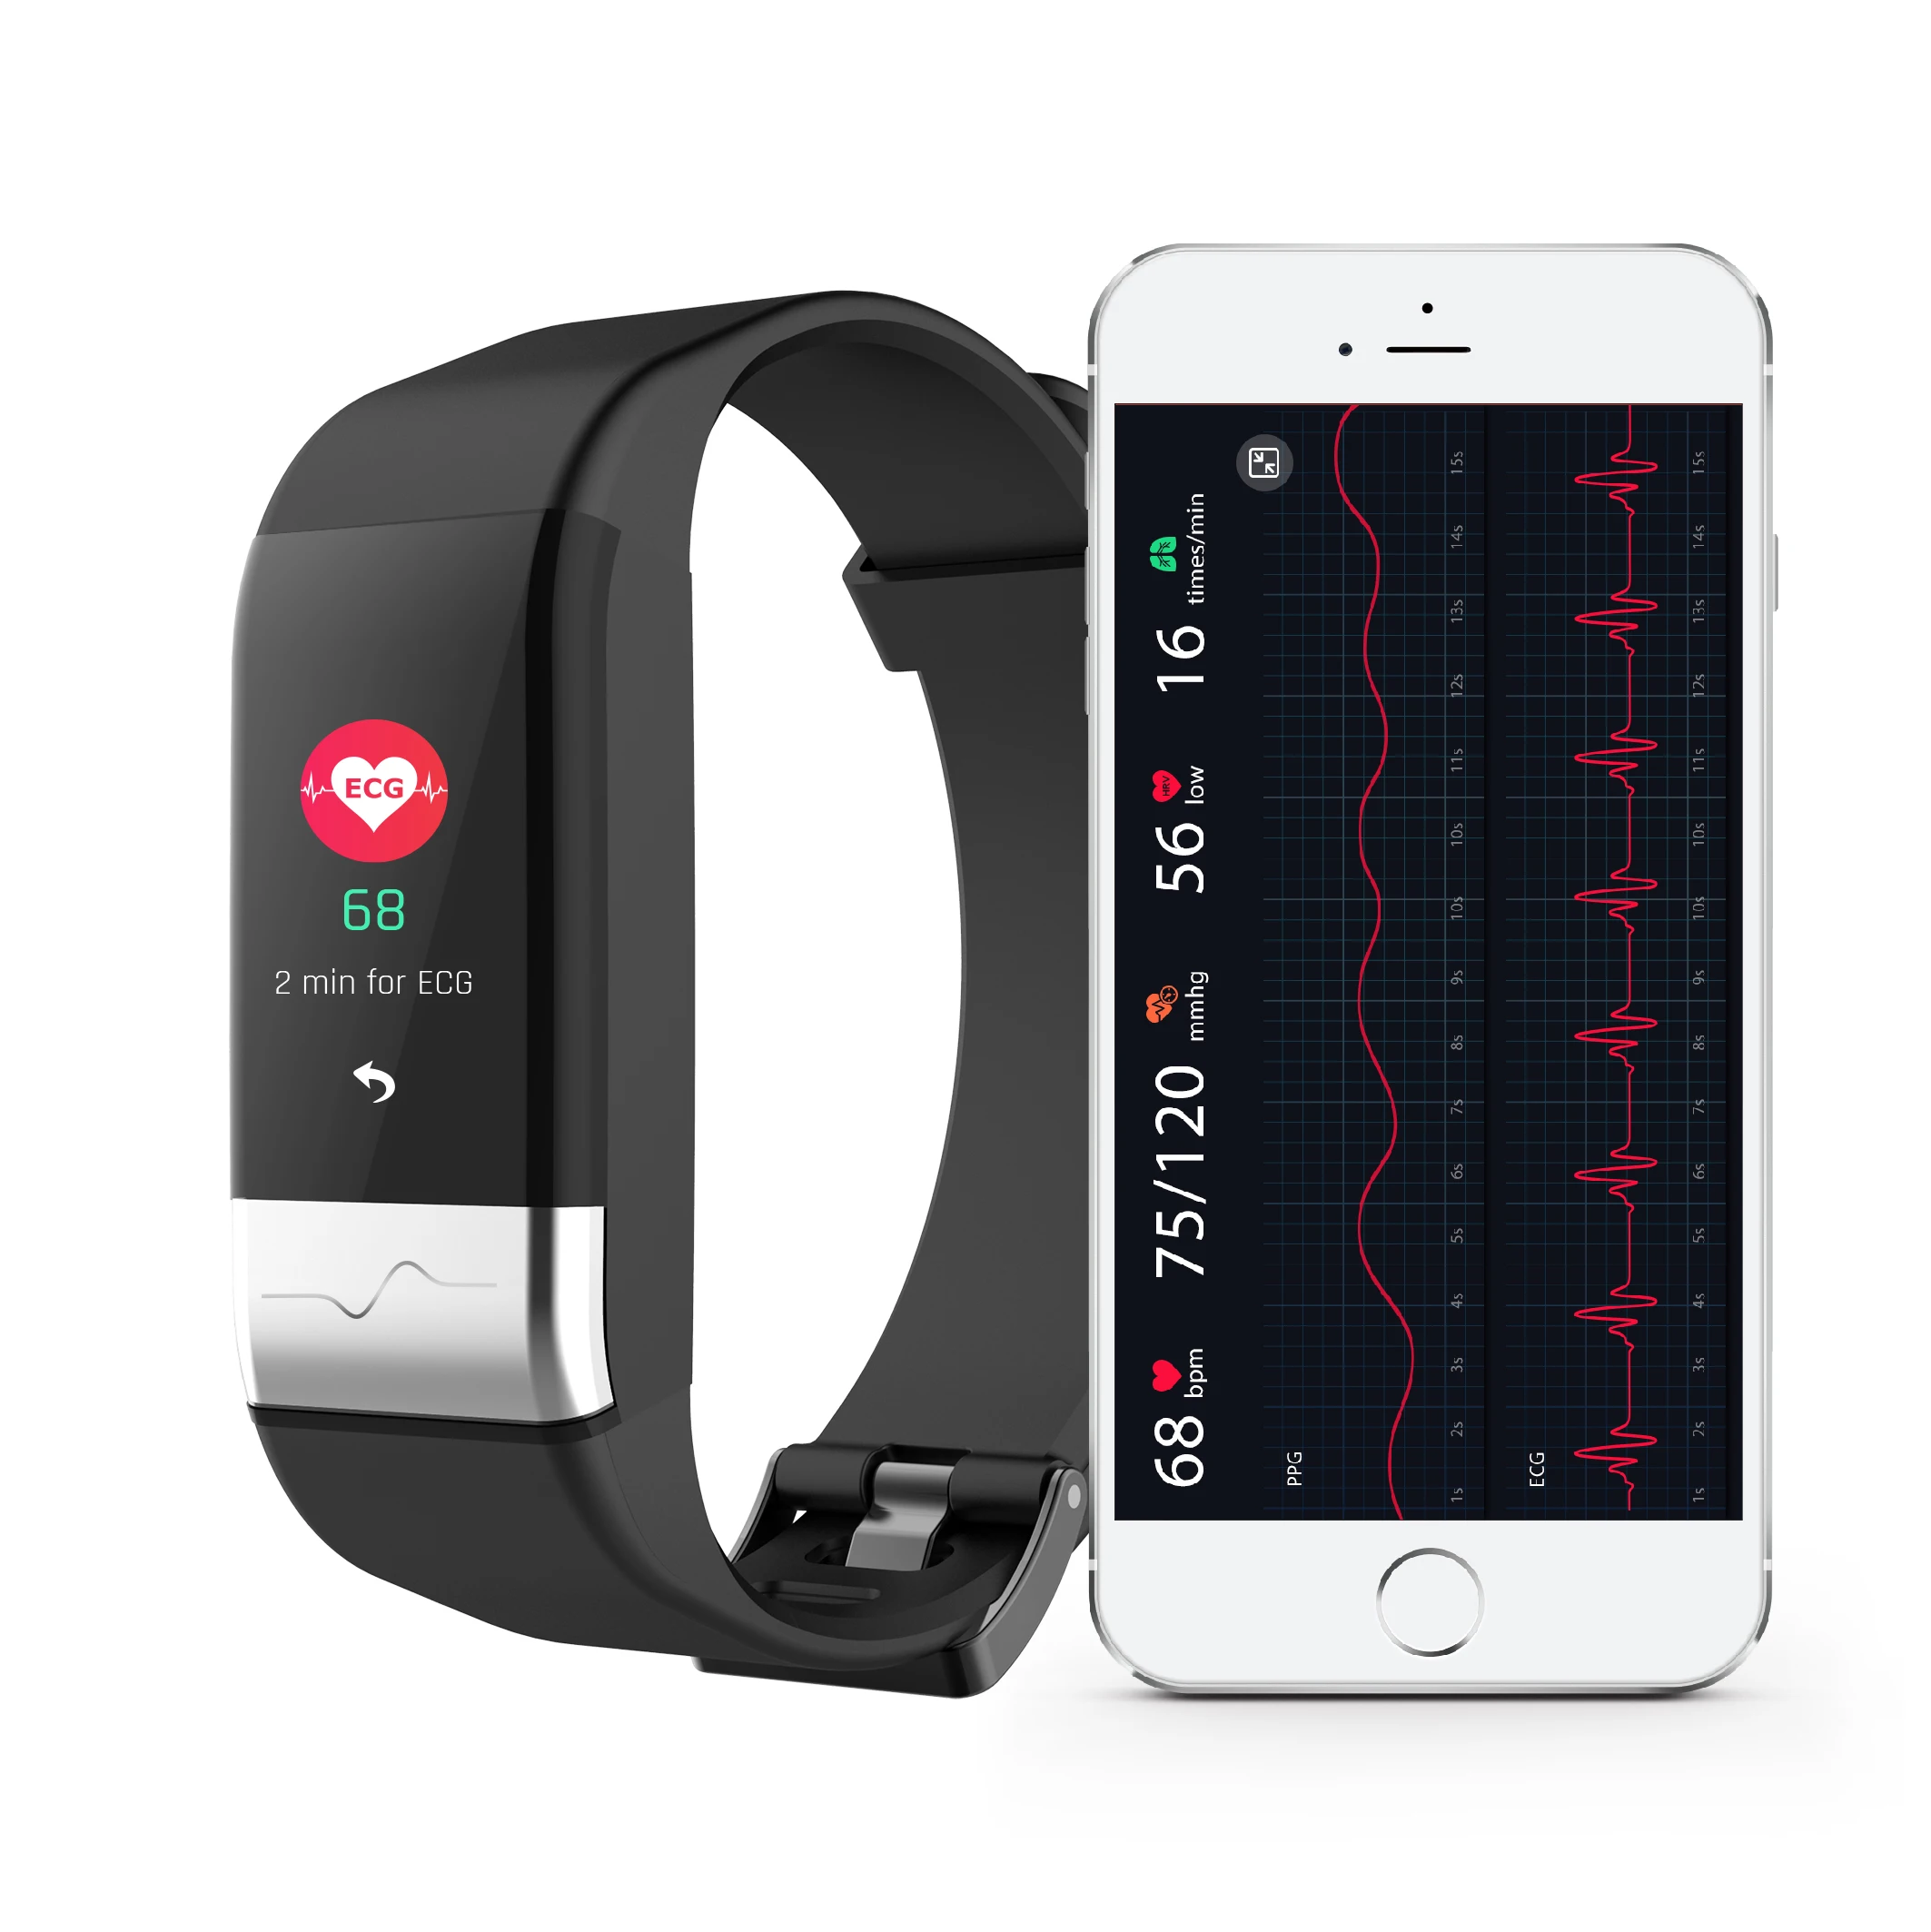 2019 latest J-Style New Smart Watch ECG+PPG Monitoring HRV Reporting Blood Pressure and Heart Rate Smart Bracelet Fitness